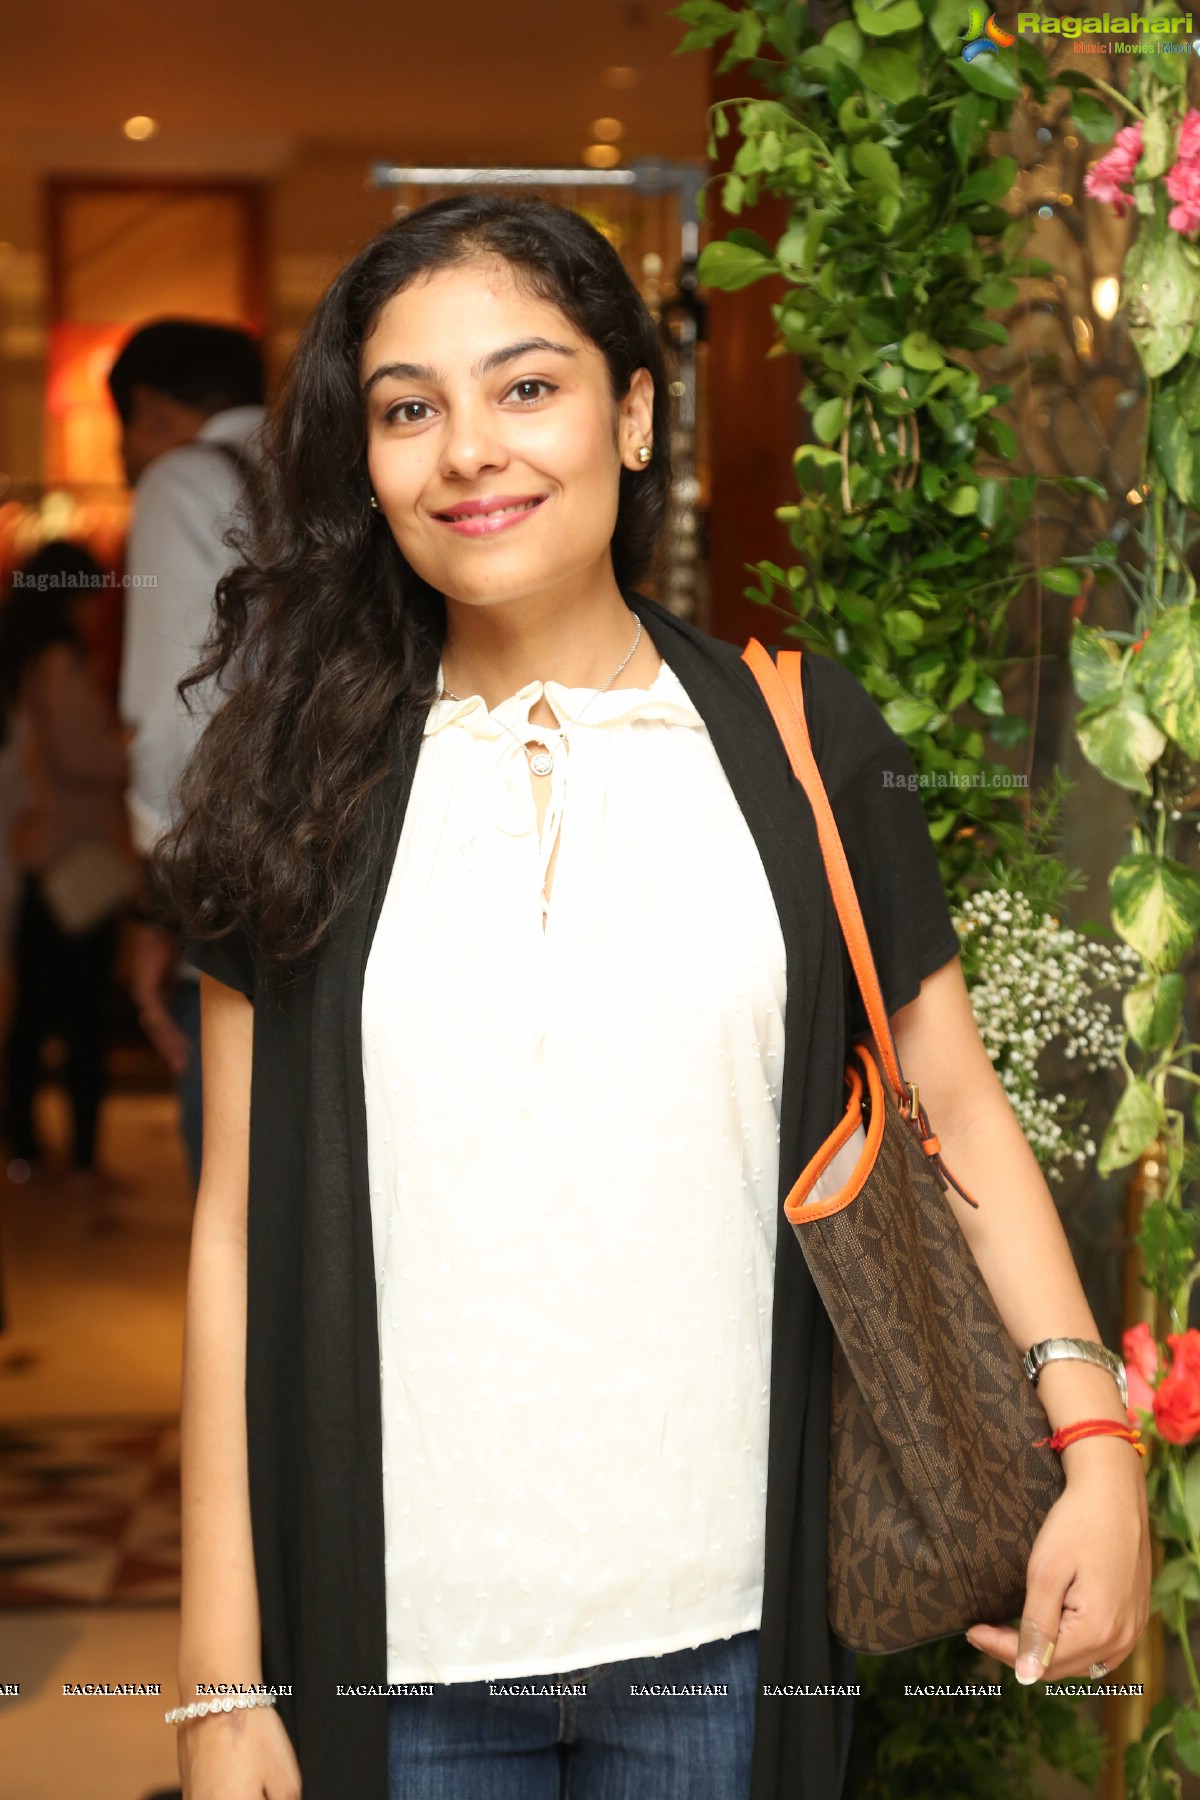 Araaish, A Fundraiser exhibition for Save The Children India foundation